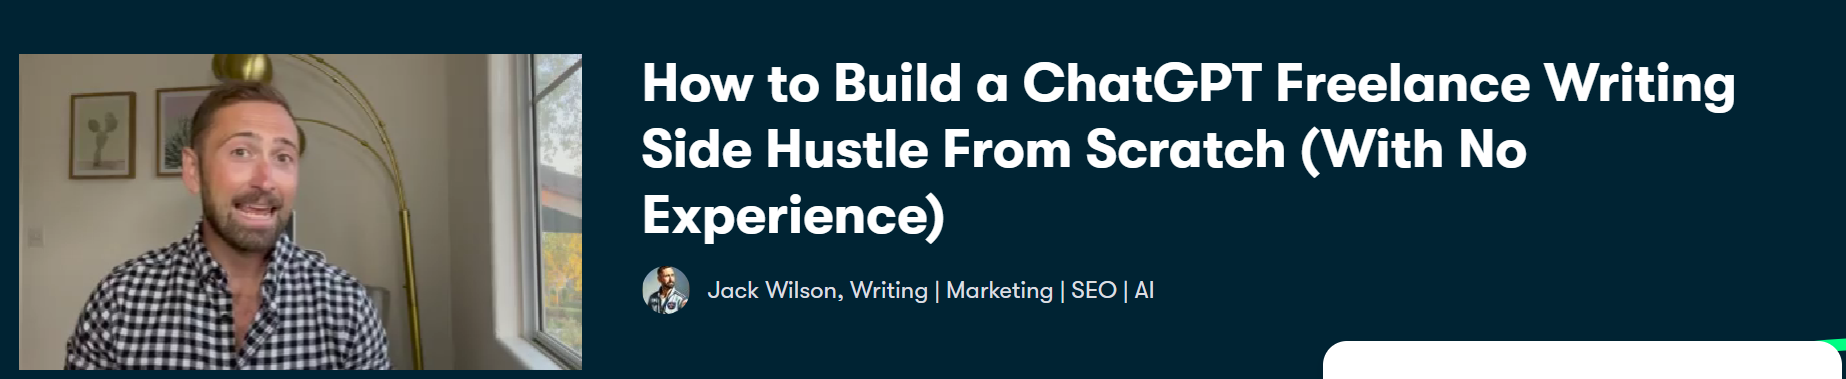 How to Build a ChatGPT Freelance Writing Side Hustle From Scratch (With No Experience)